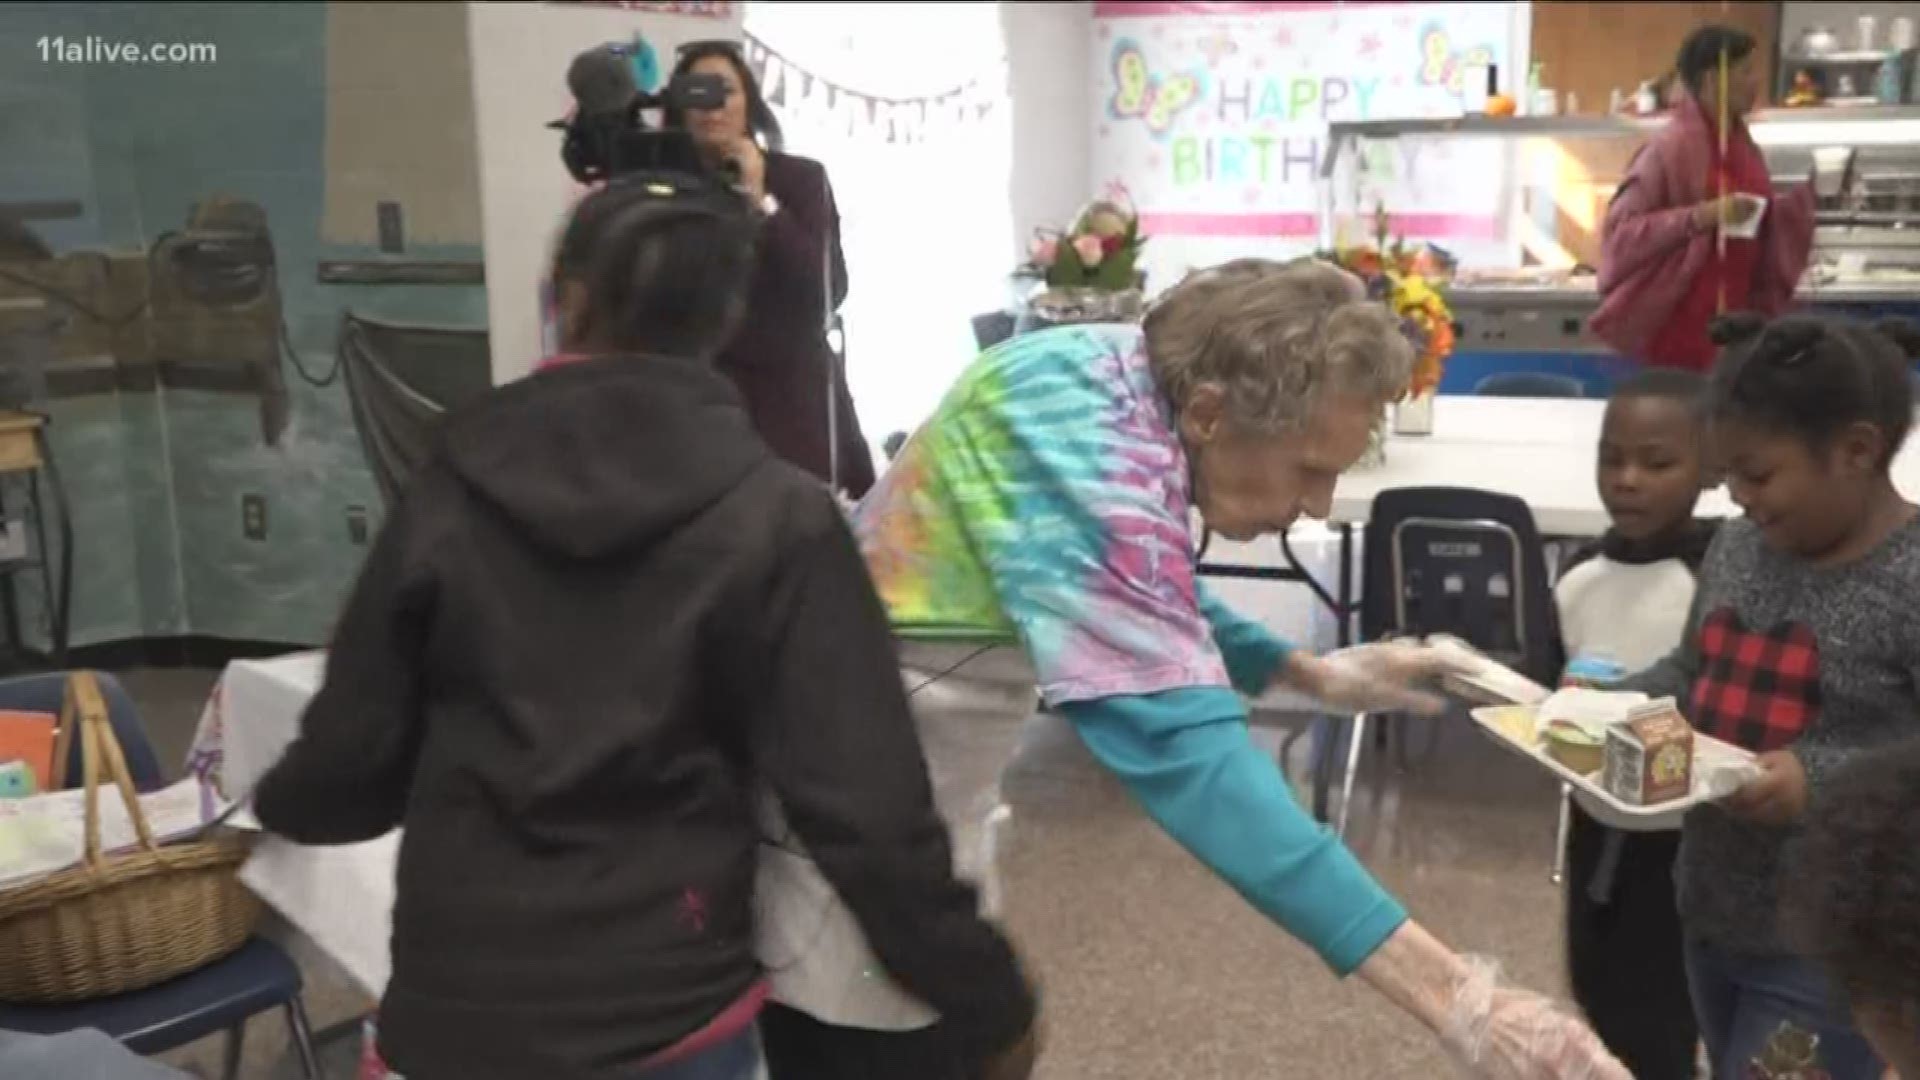 Martha Strickland, known as "Granny", handed out cookies Tuesday at Shiloh Elementary School to celebrate her 95th birthday.